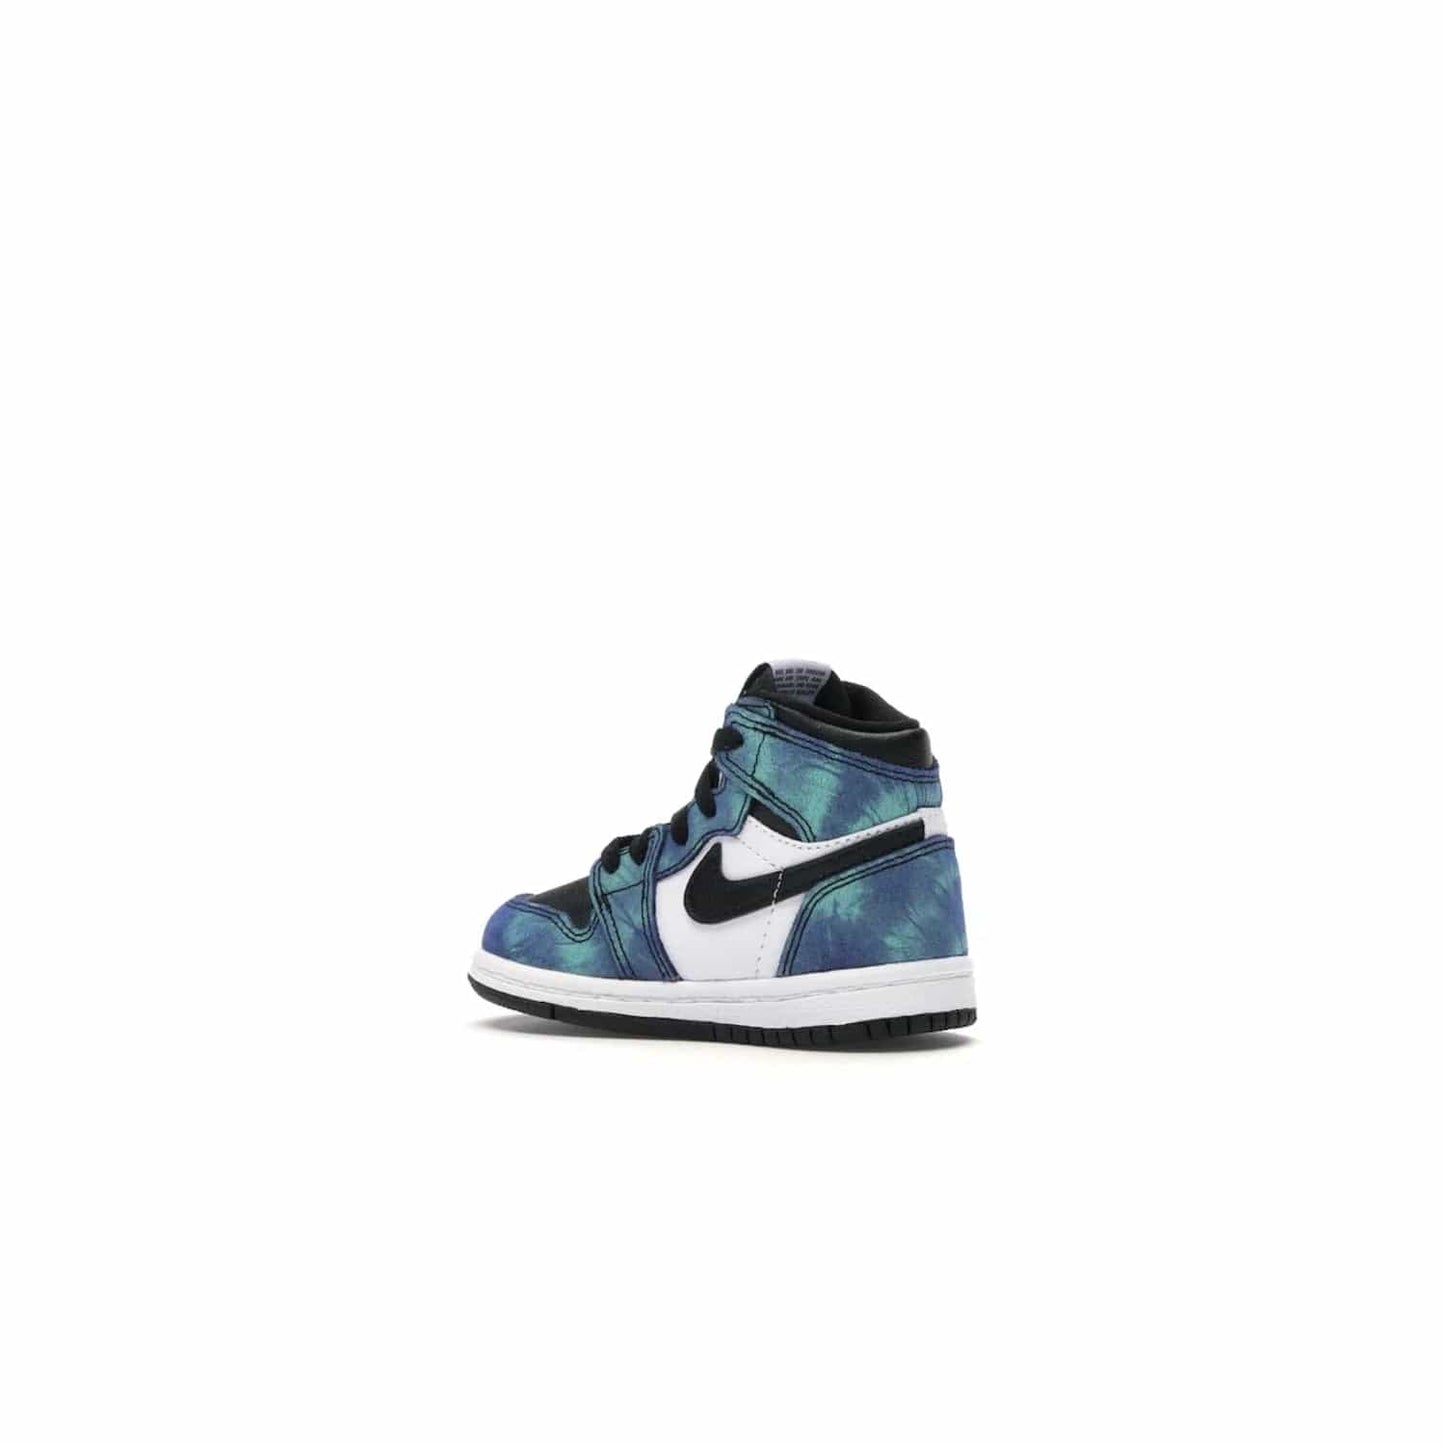 Jordan 1 Retro High Tie Dye (TD) - Image 22 - Only at www.BallersClubKickz.com - Add a unique twist to your sneaker collection with the Jordan 1 Retro High Tie Dye (TD). Classic Air Jordan 1 details like toe box perforations and the signature Swoosh logo on the sidewall are topped with an eye-catching tie dye design that’s perfect for styling all year round.